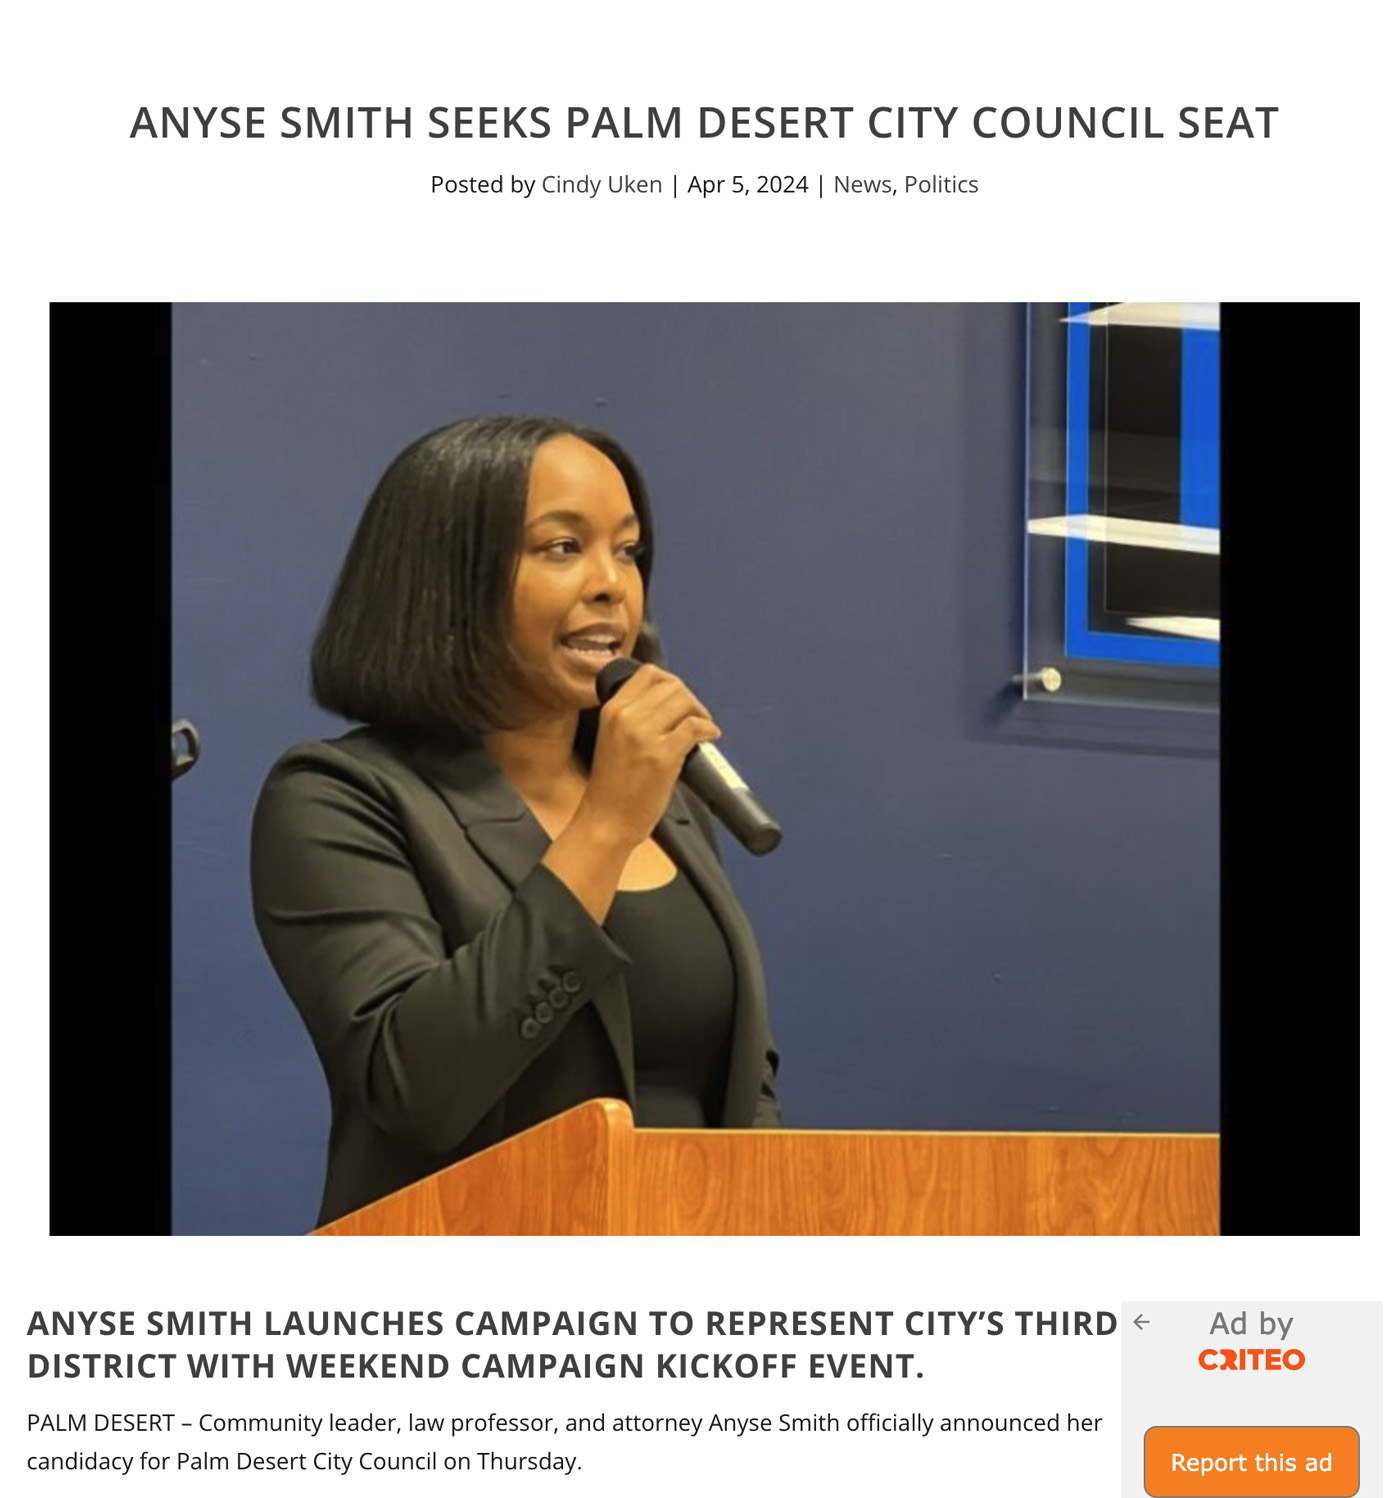 Anyse Smith Seeks Palm Desert City Council Seat